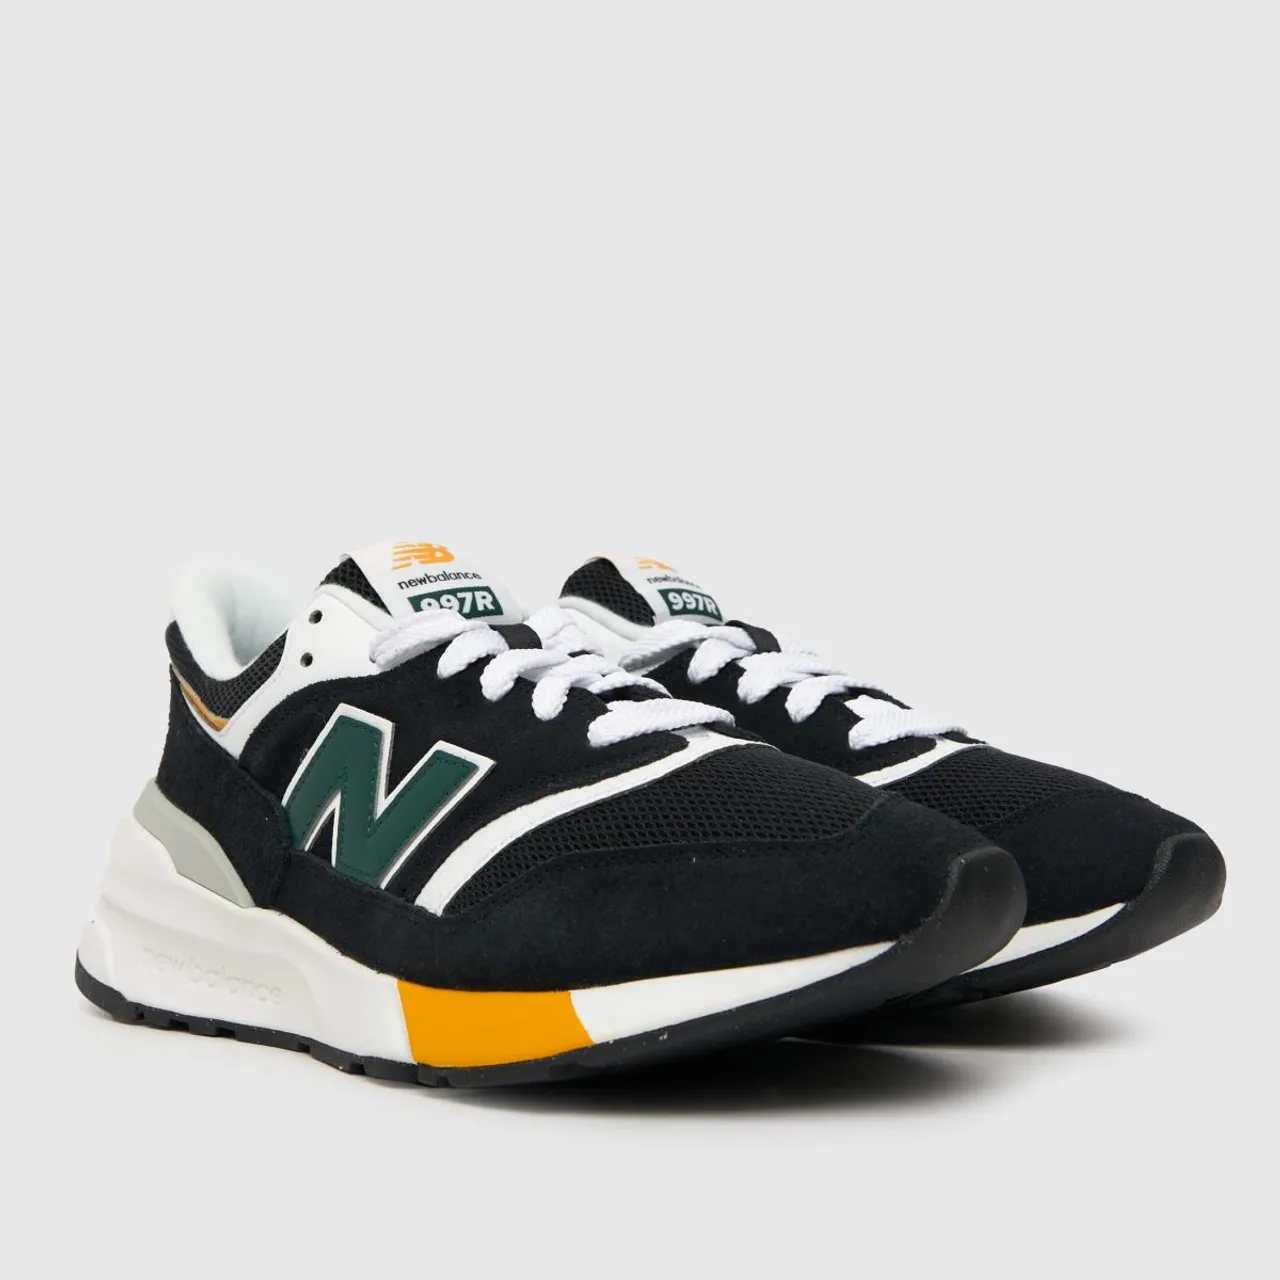 New Balance 997 Trainers in Black & Green